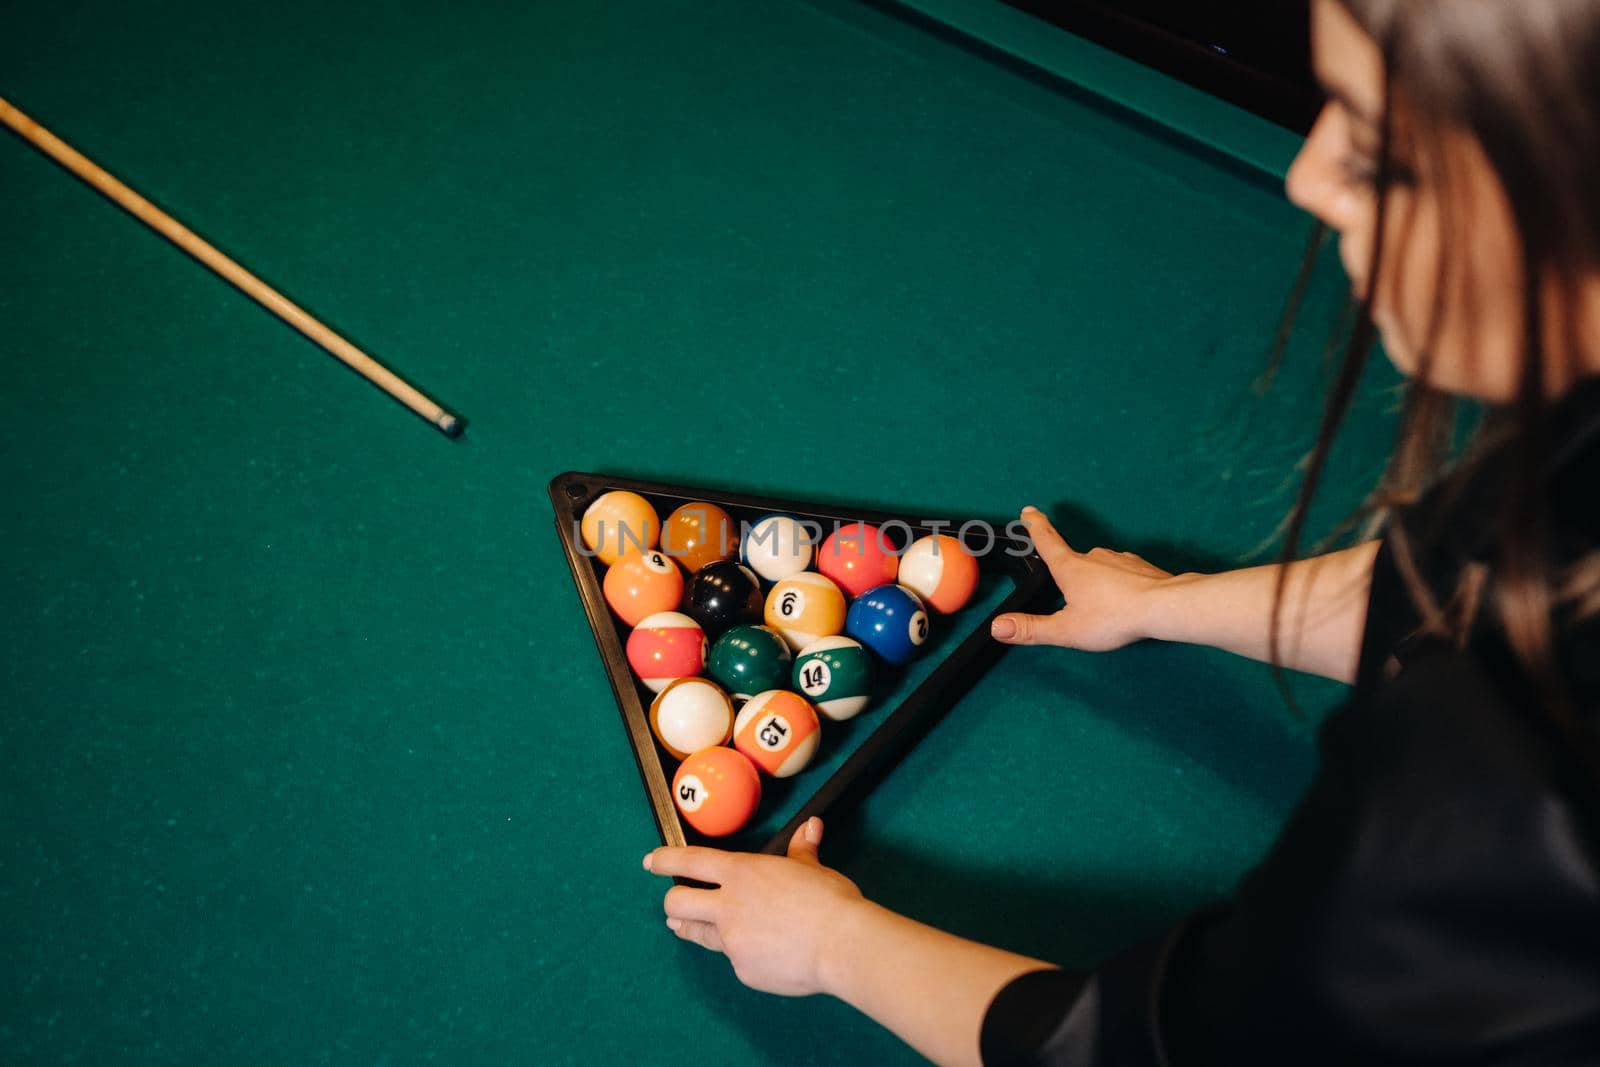 The girl puts out billiard balls to start the game in the billiard club .Playing pool by Lobachad